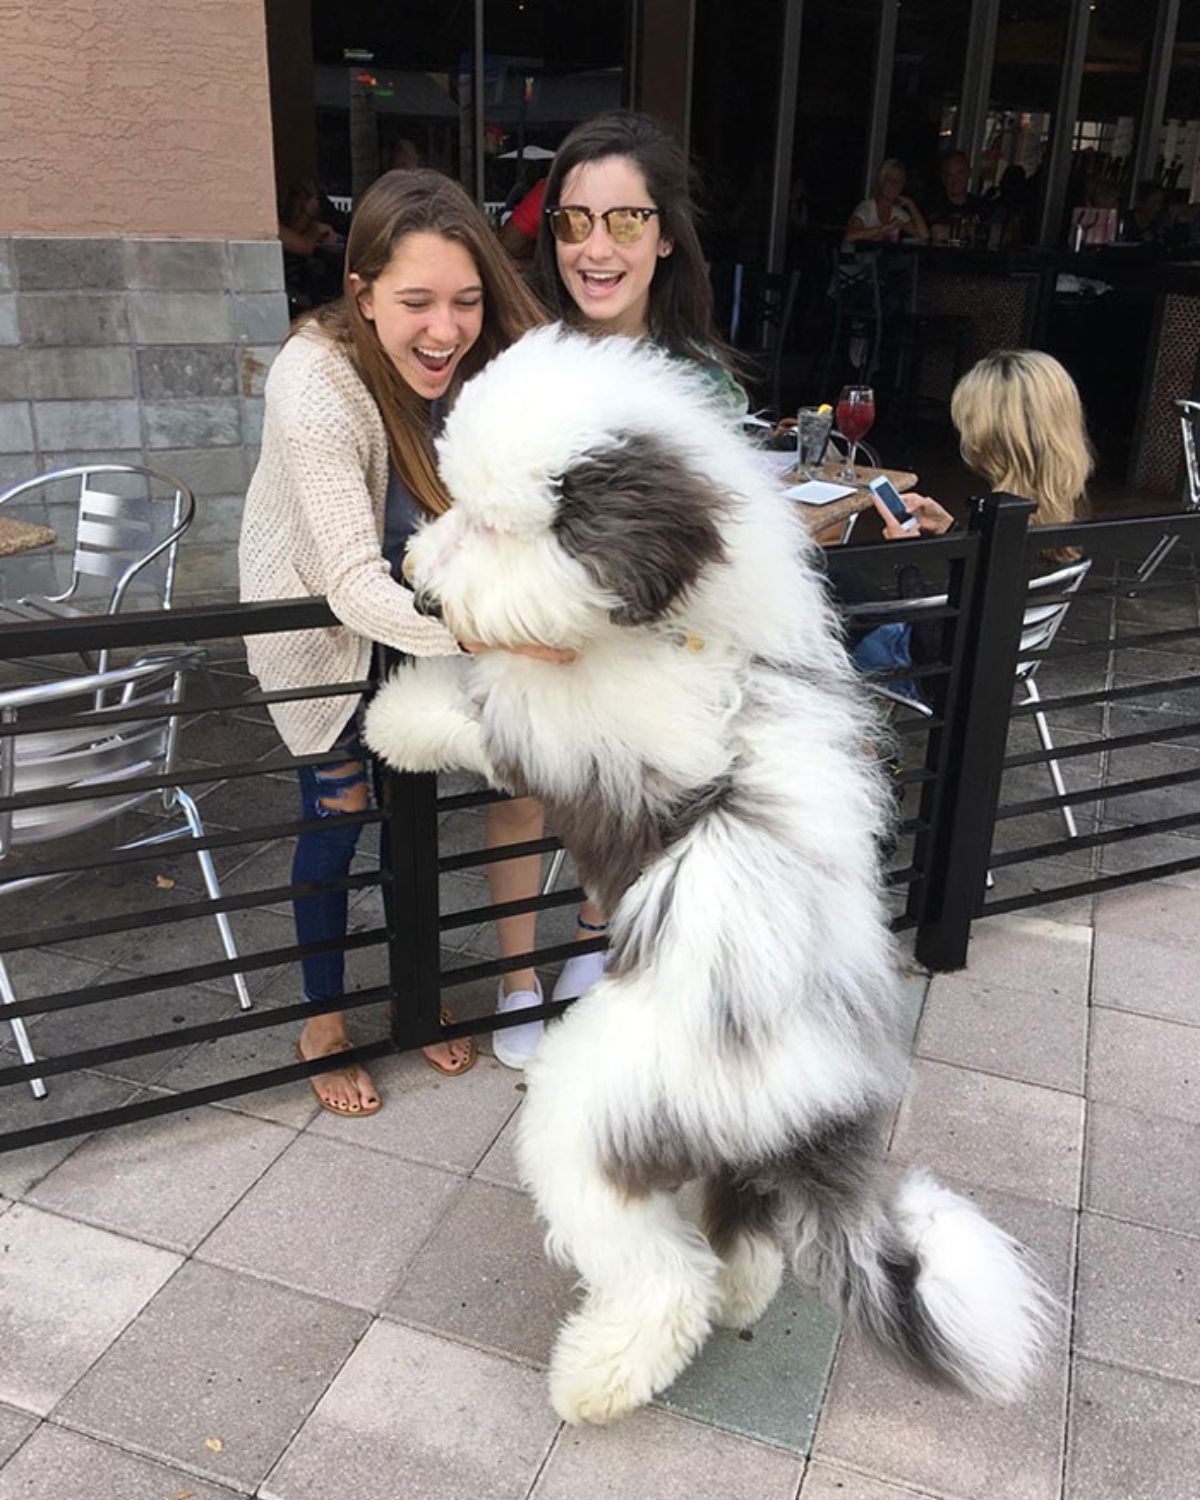 large fluffy black and white dog standing on hind legs and getting petted over a black metal railing